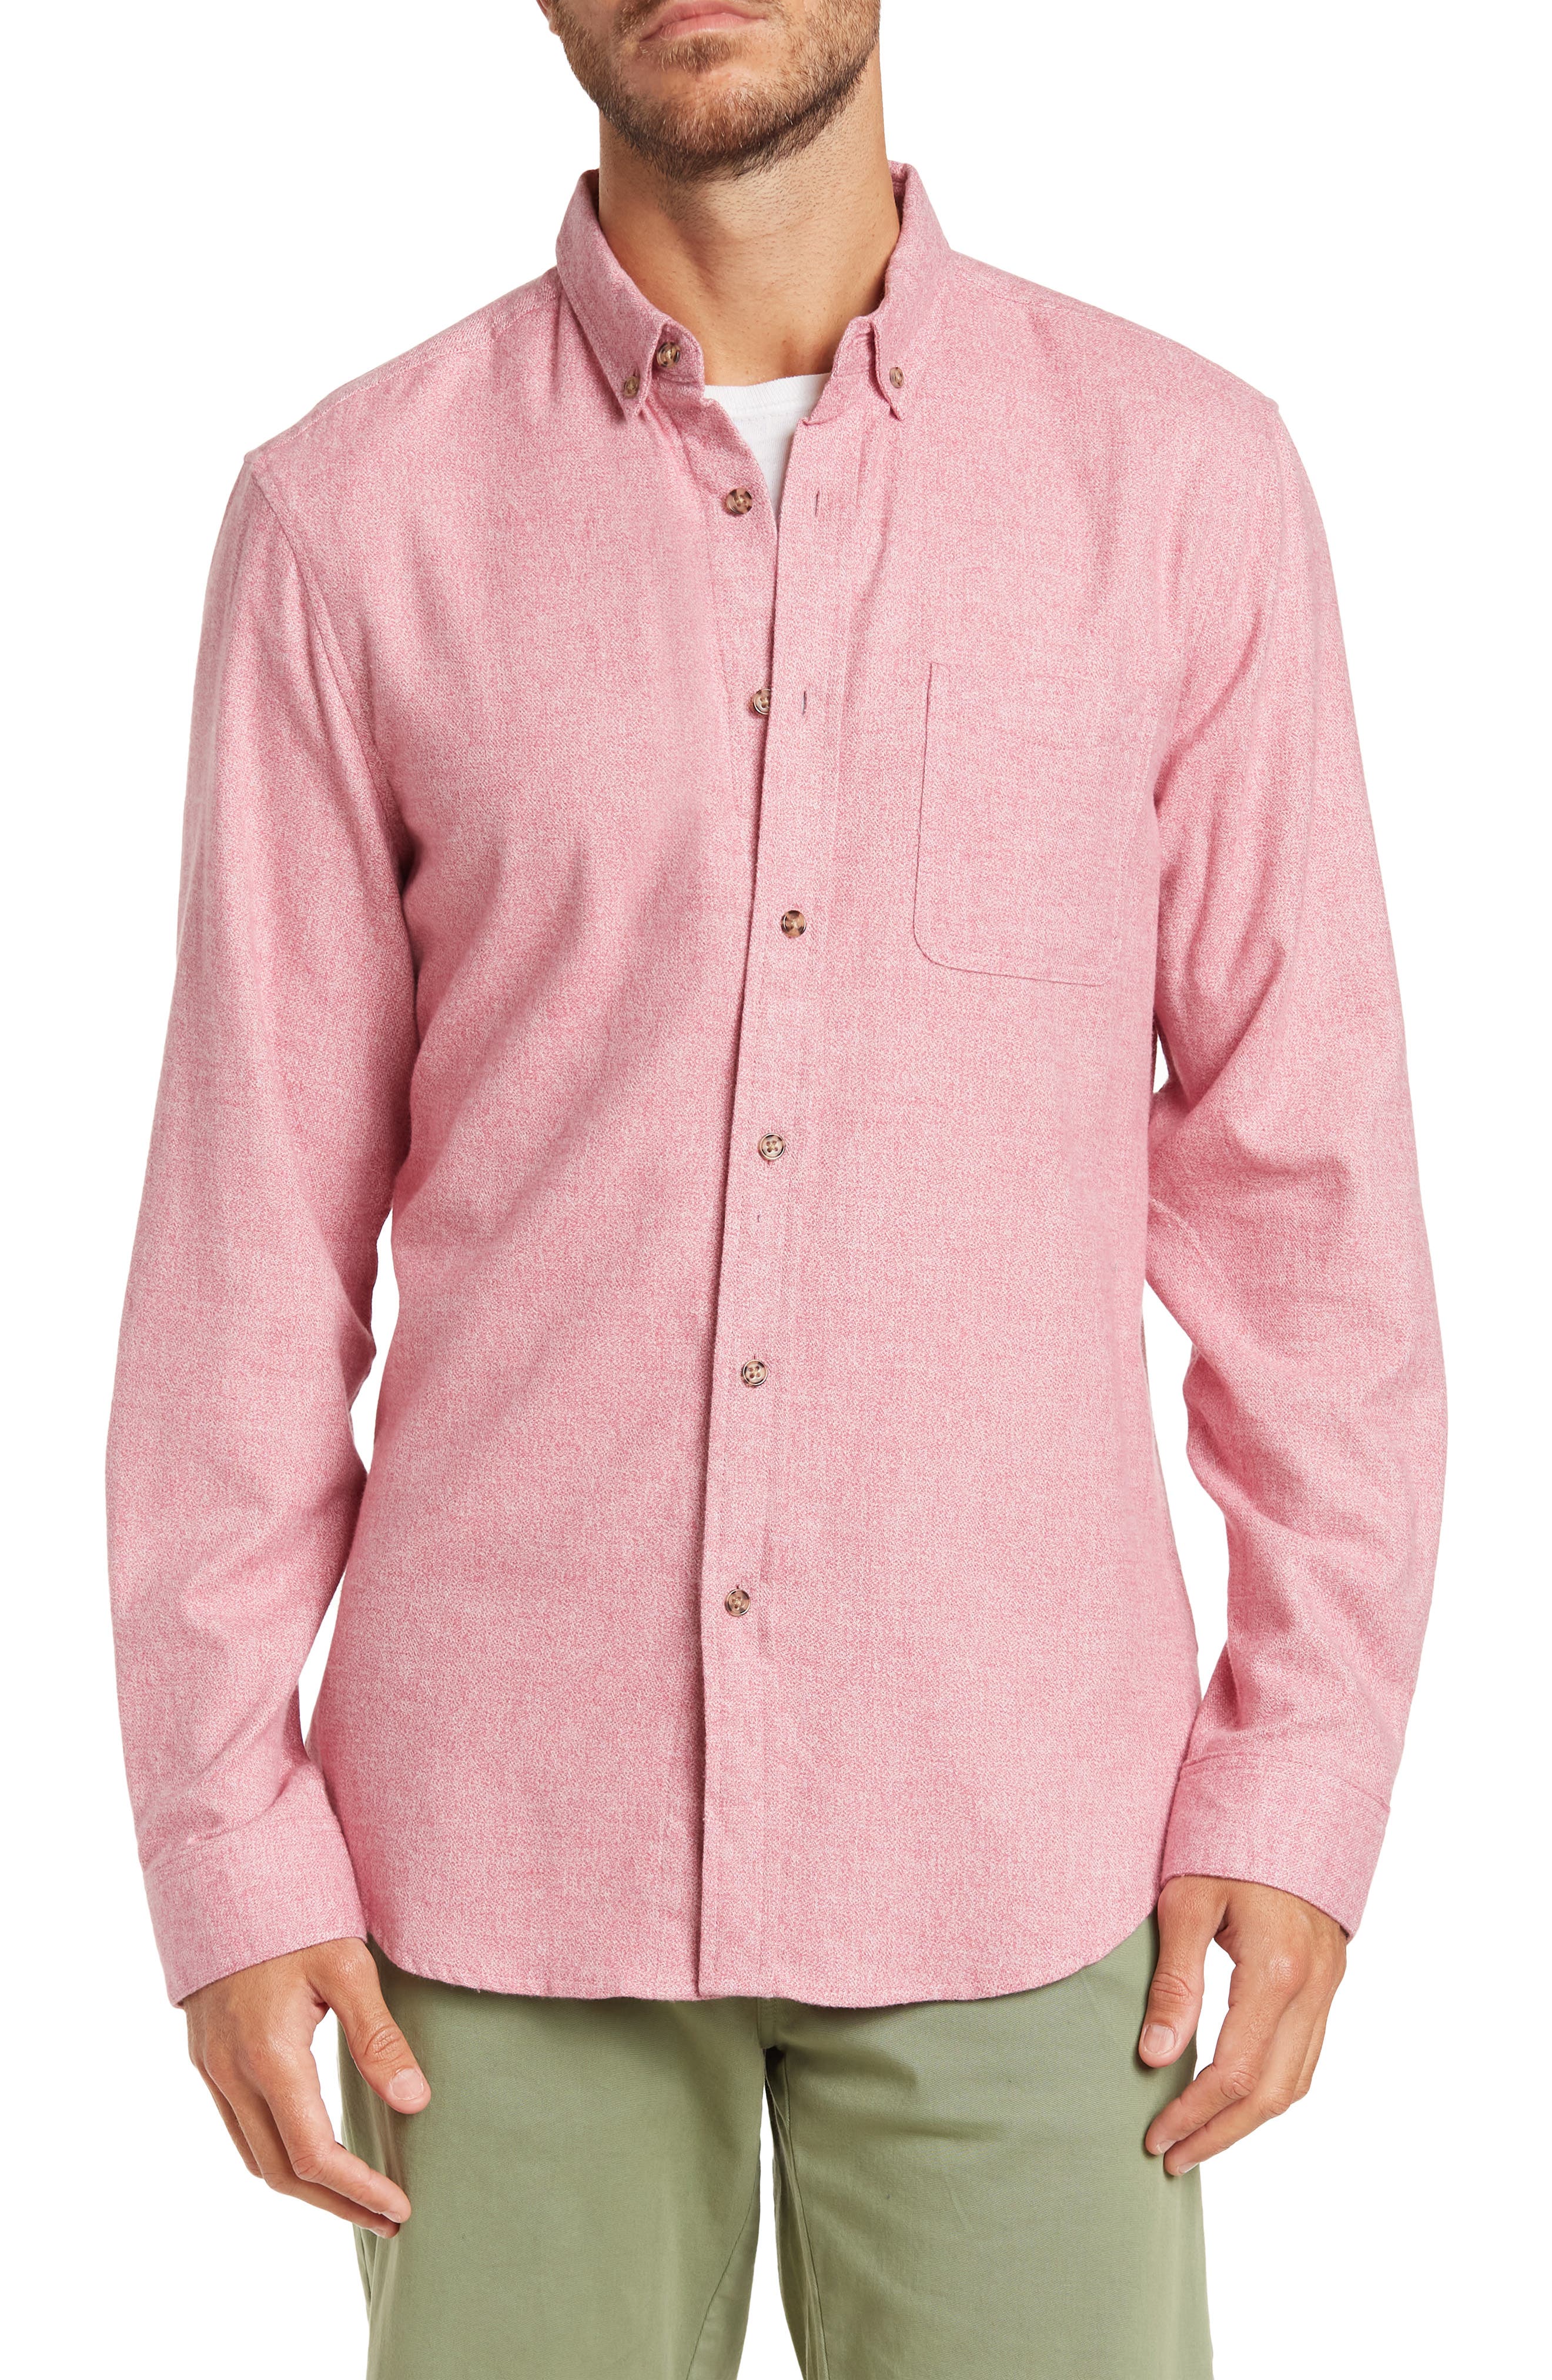 Guglielminotti Cotton Shirt in Coral Mens Clothing Shirts Casual shirts and button-up shirts Pink for Men 